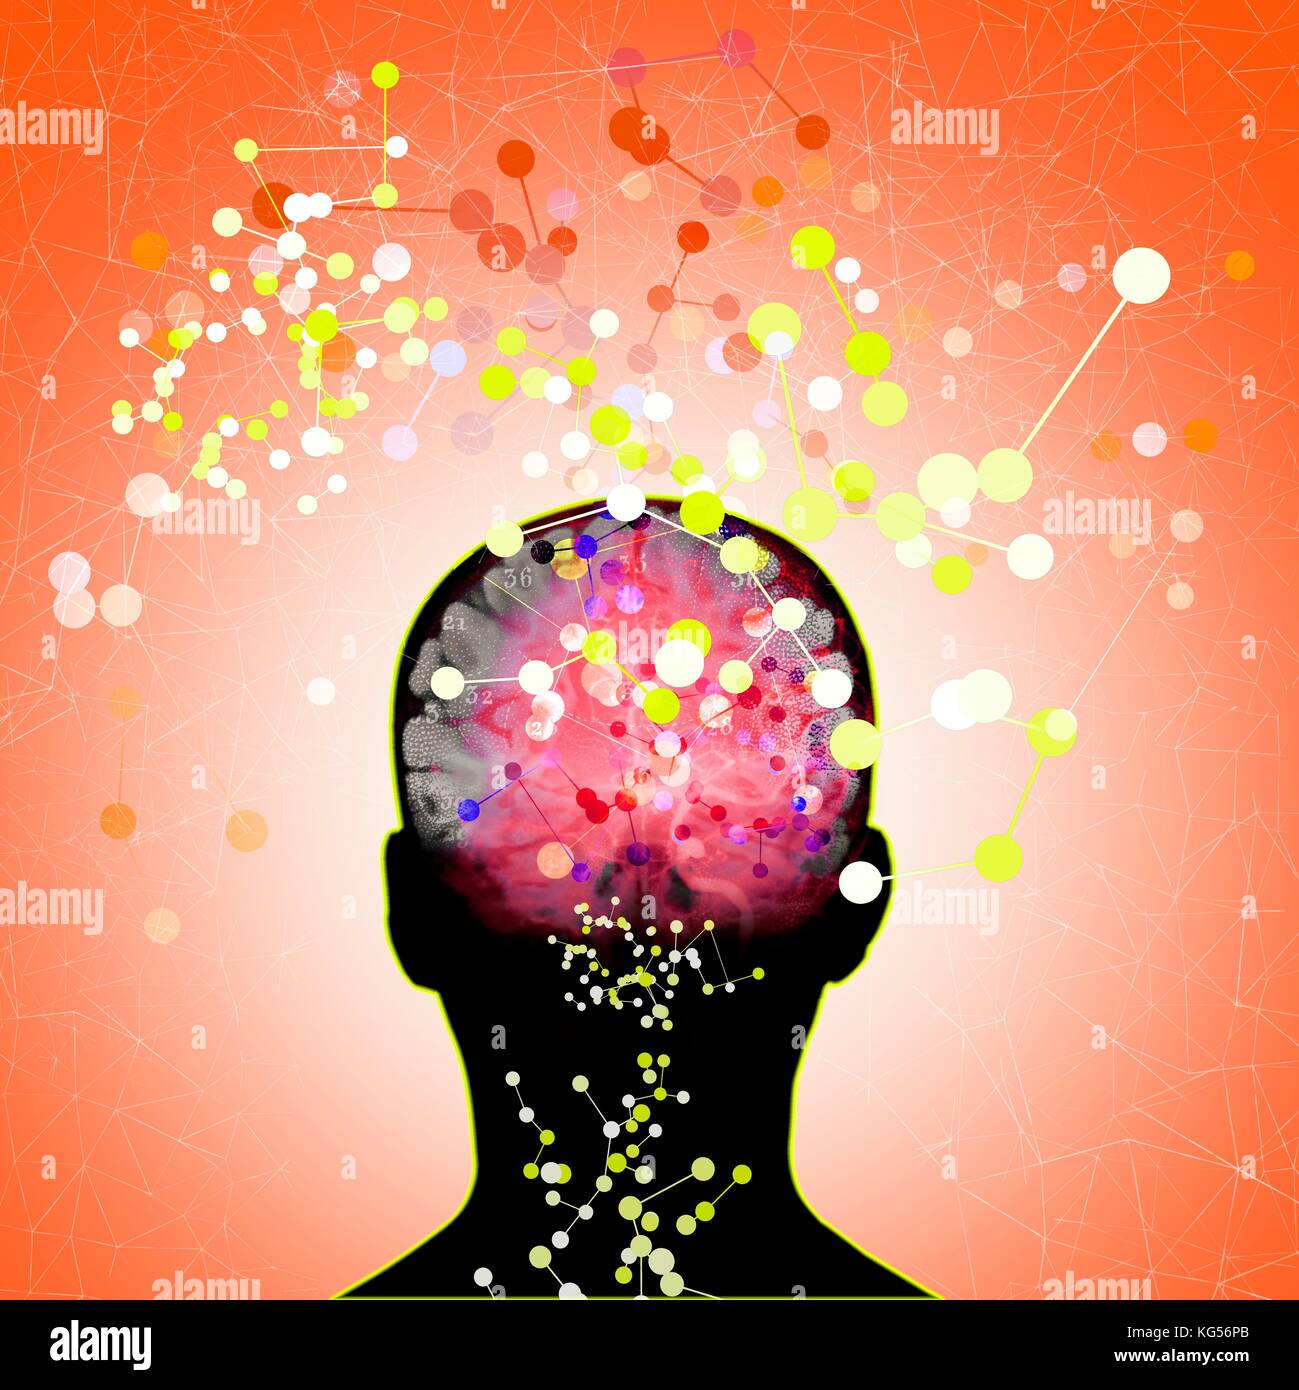 Human head with connecting lines and dots, illustration. Stock Photo